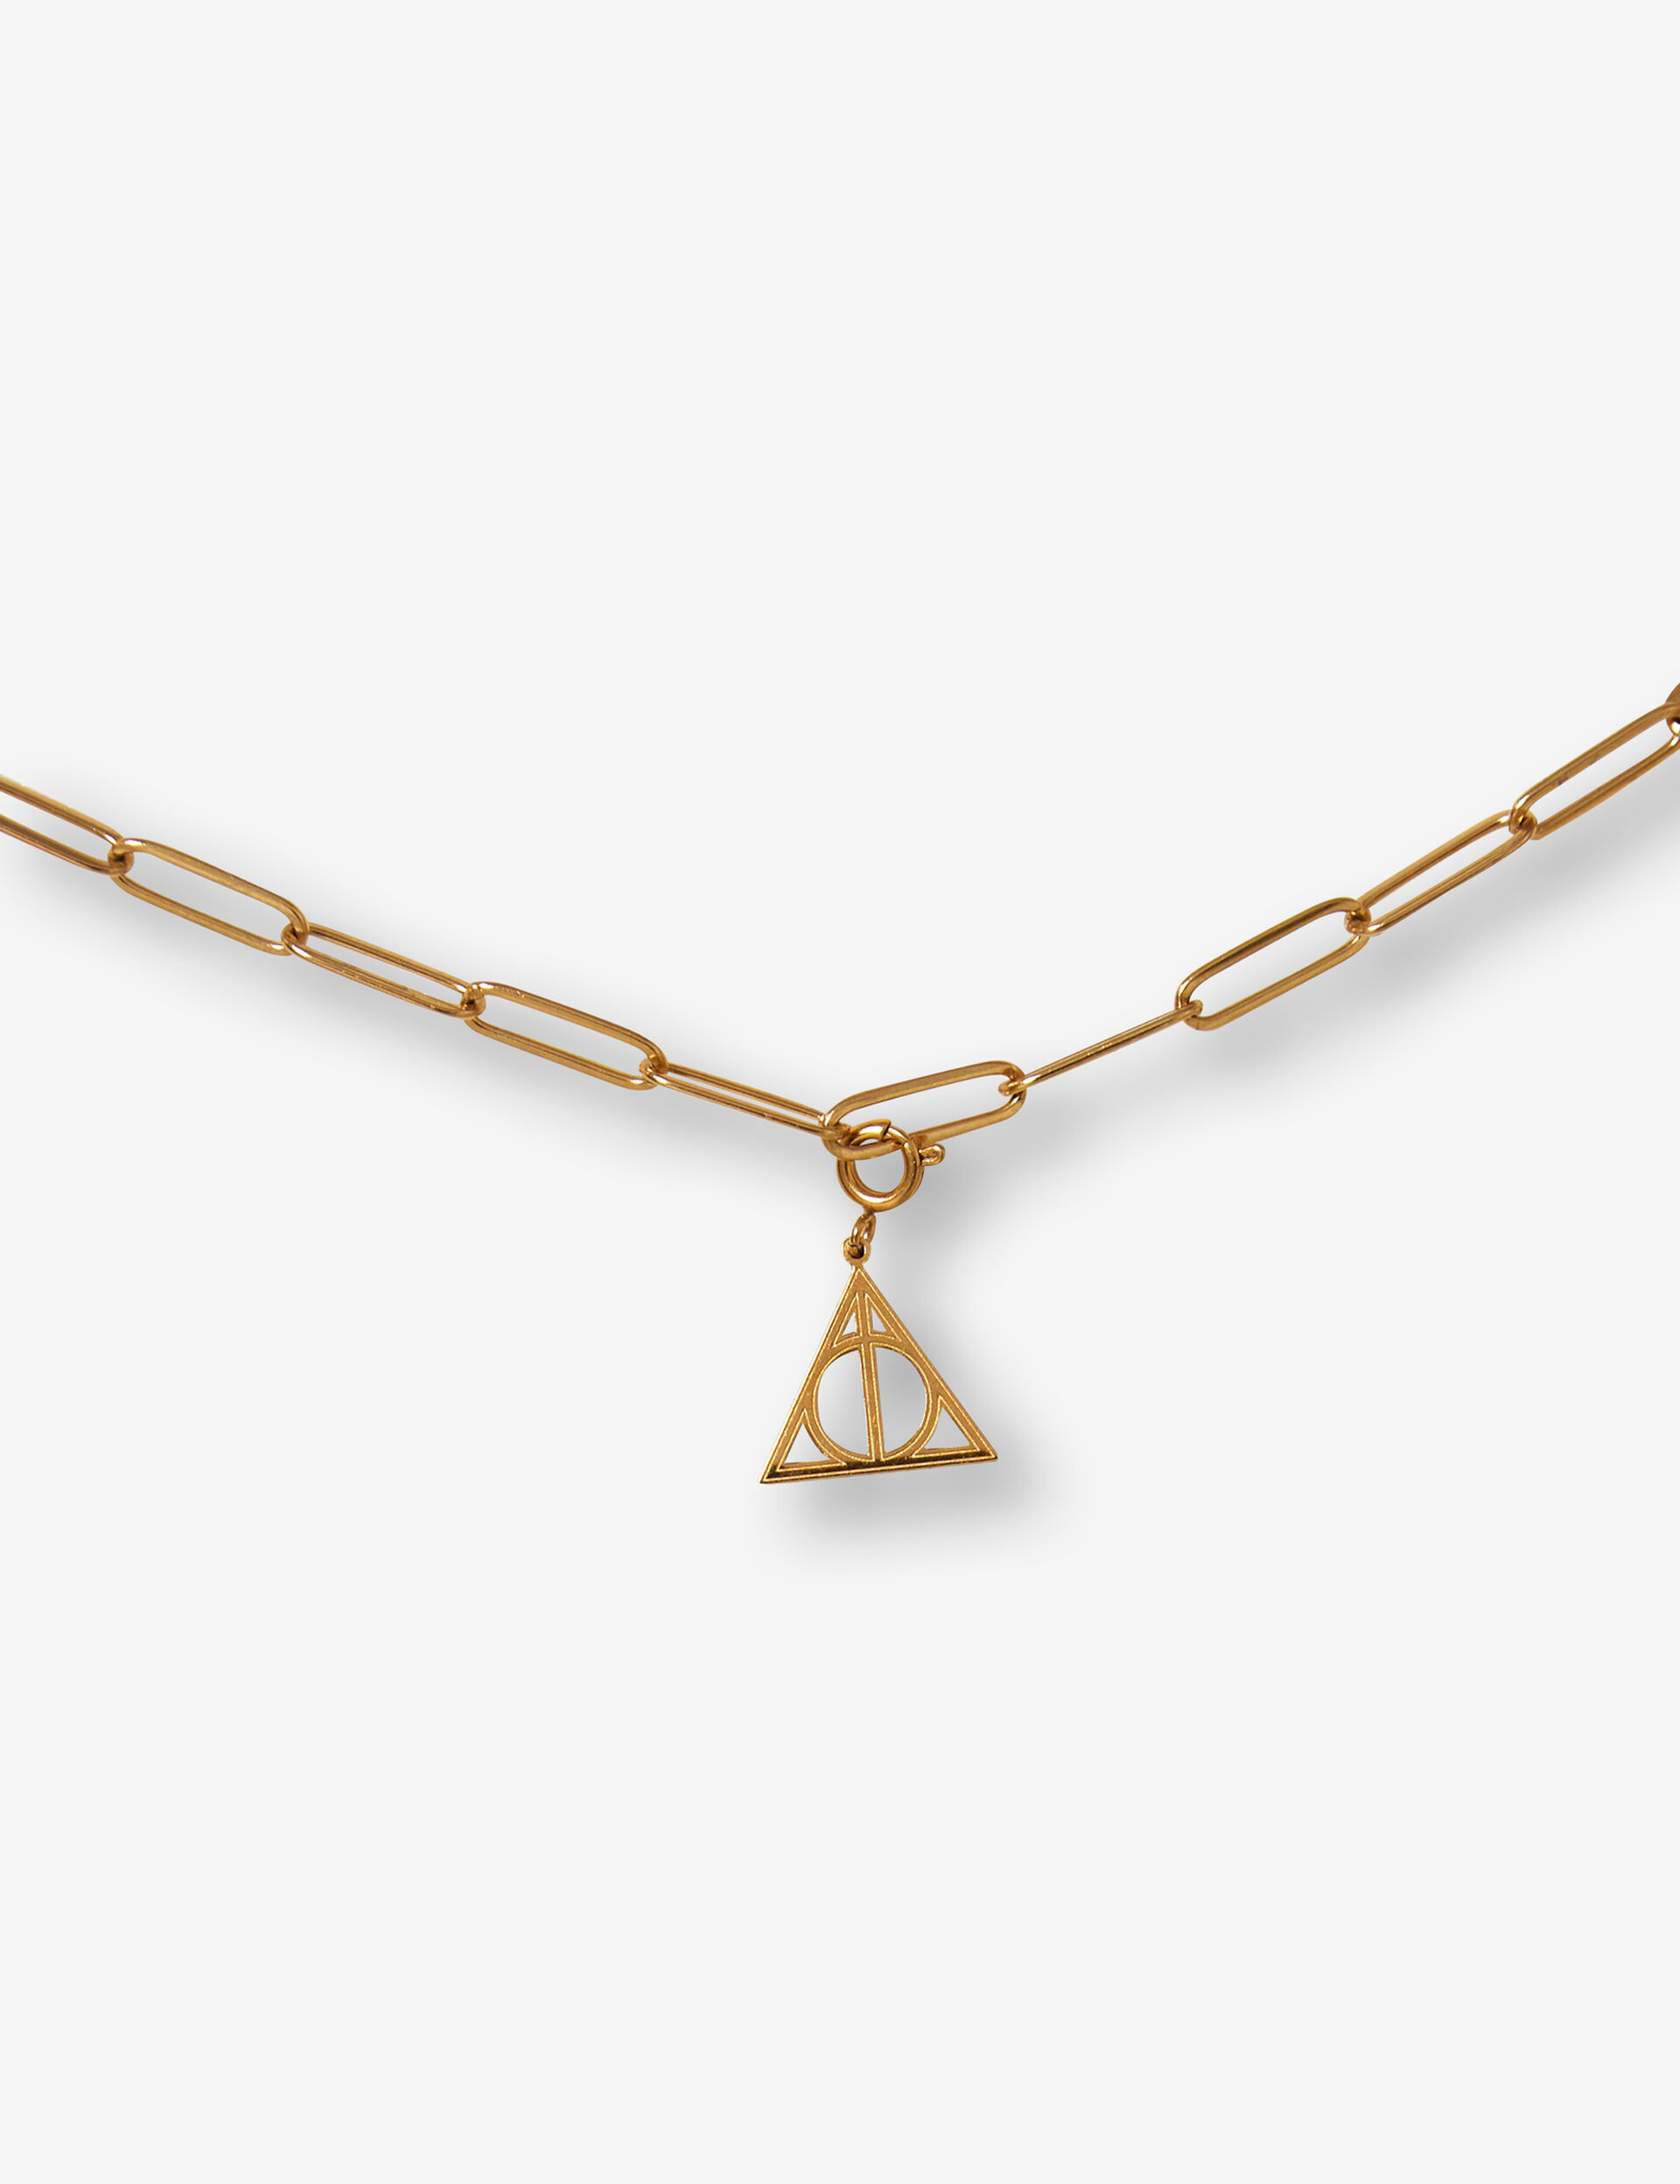 Harry Potter Deathly Hallows charm